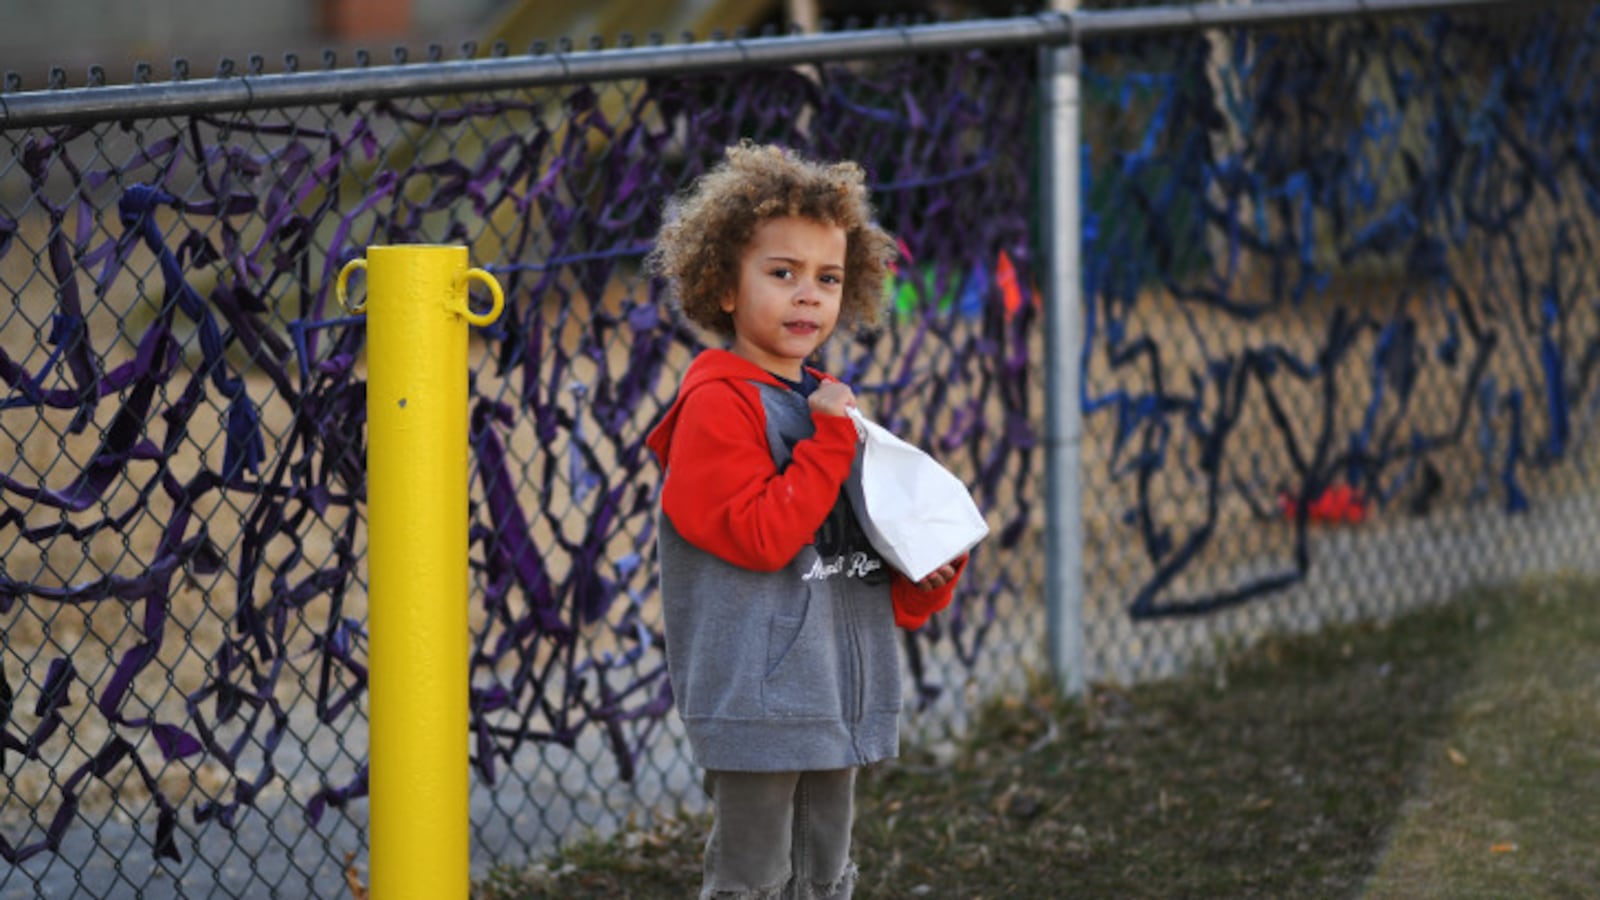 Four-year-old Jaxson Rubal holds a free sack breakfast given to him outside Cowell Elementary on March 16, 2020 in Denver, Colorado.